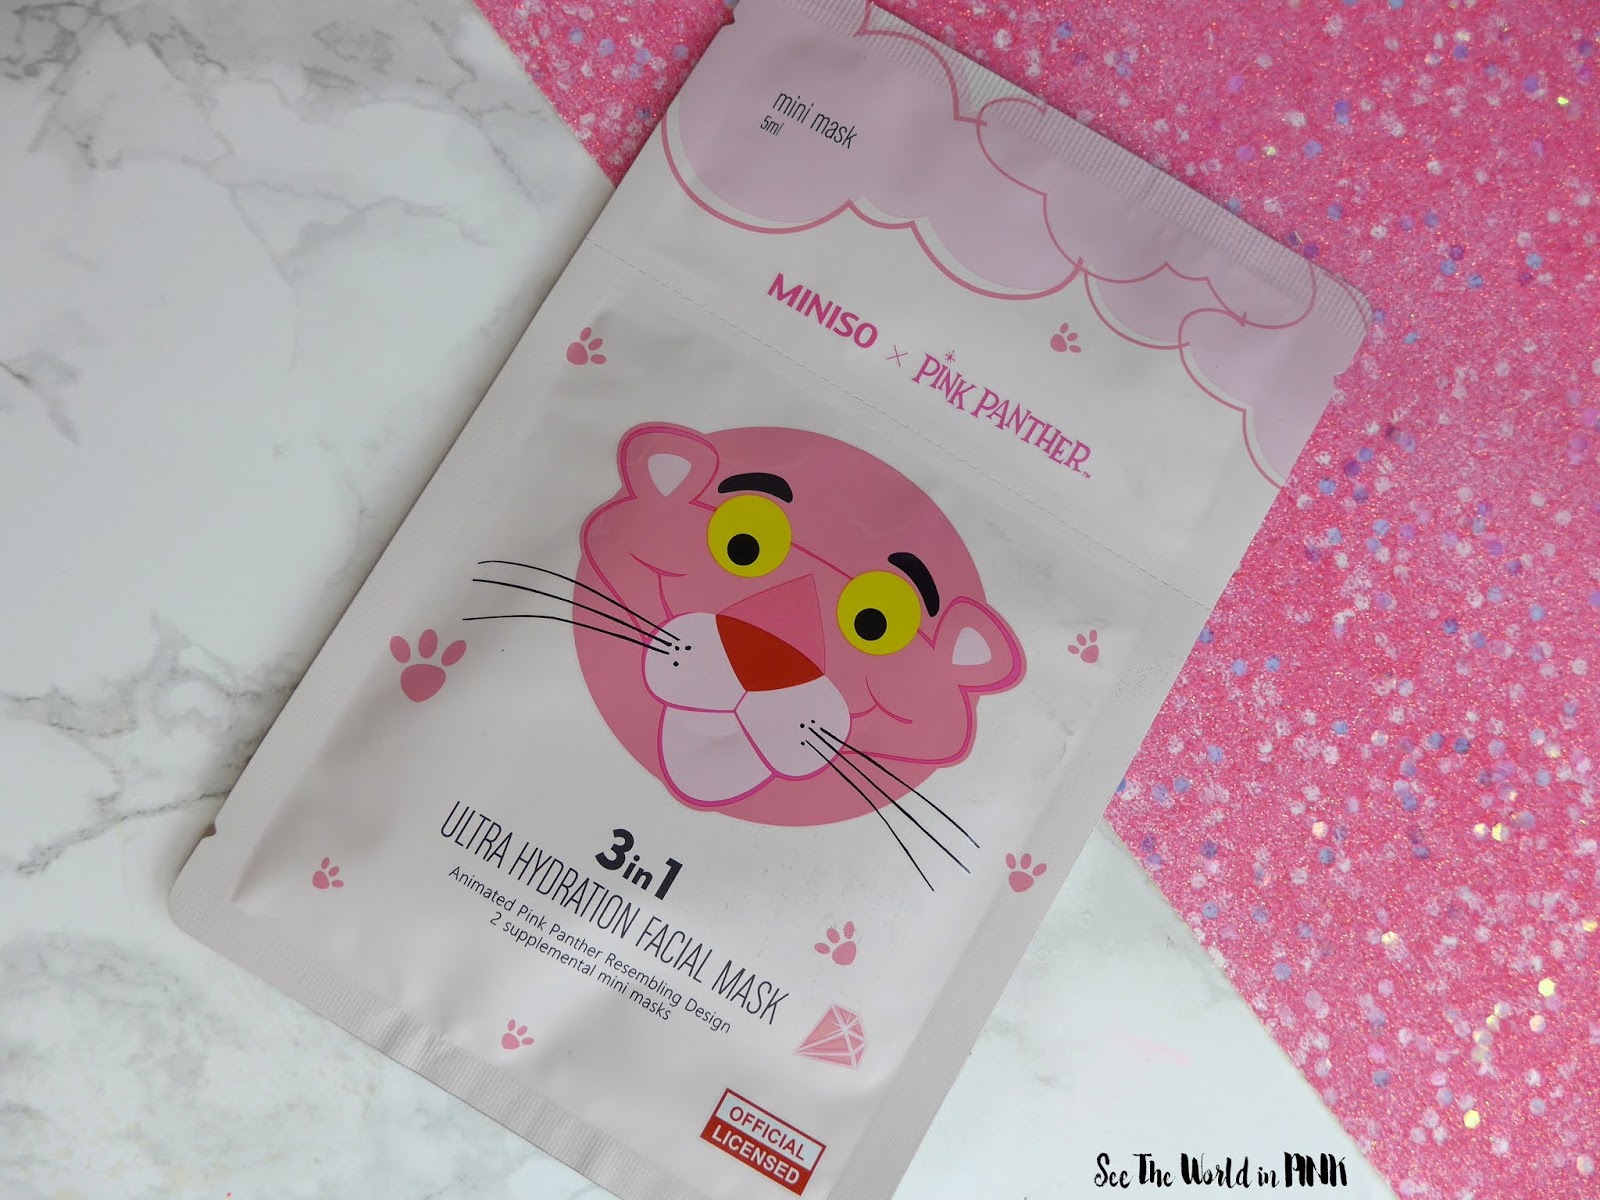 Miniso x Pink Panther 3 in 1 Ultra Hydration Facial Mask 